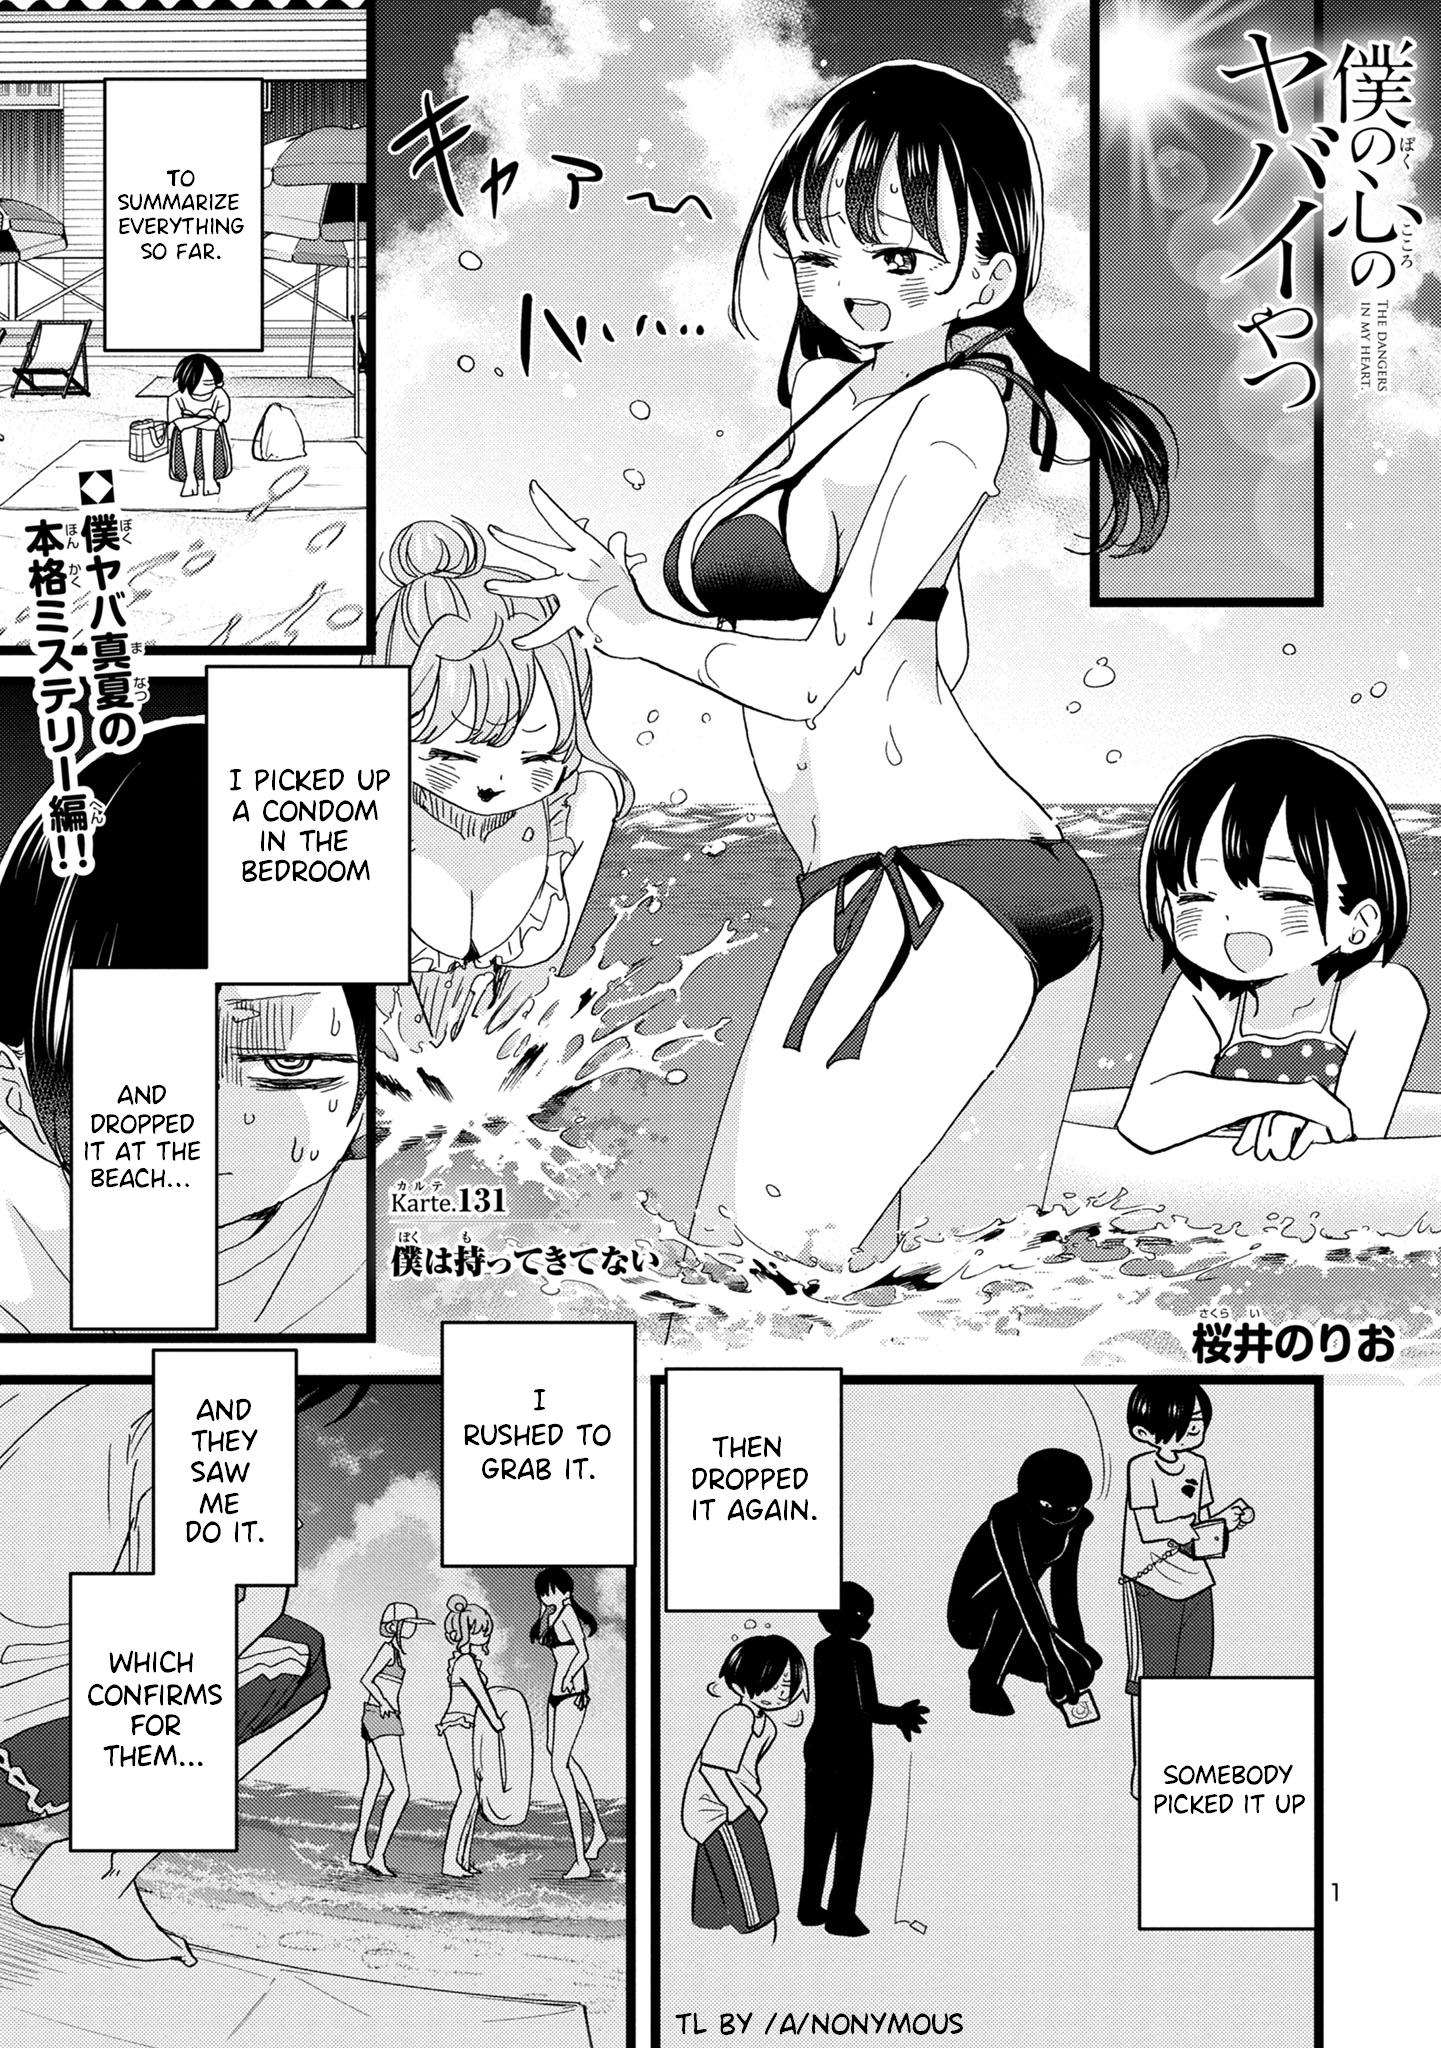 Jericho Jade James on X: I did it! Typeset 10 pages in 1 hour! Here is Boku  no Kokoro no Yabai Yatsu Chapter 131 (I Didn't Bring It!) [1/3]   / X